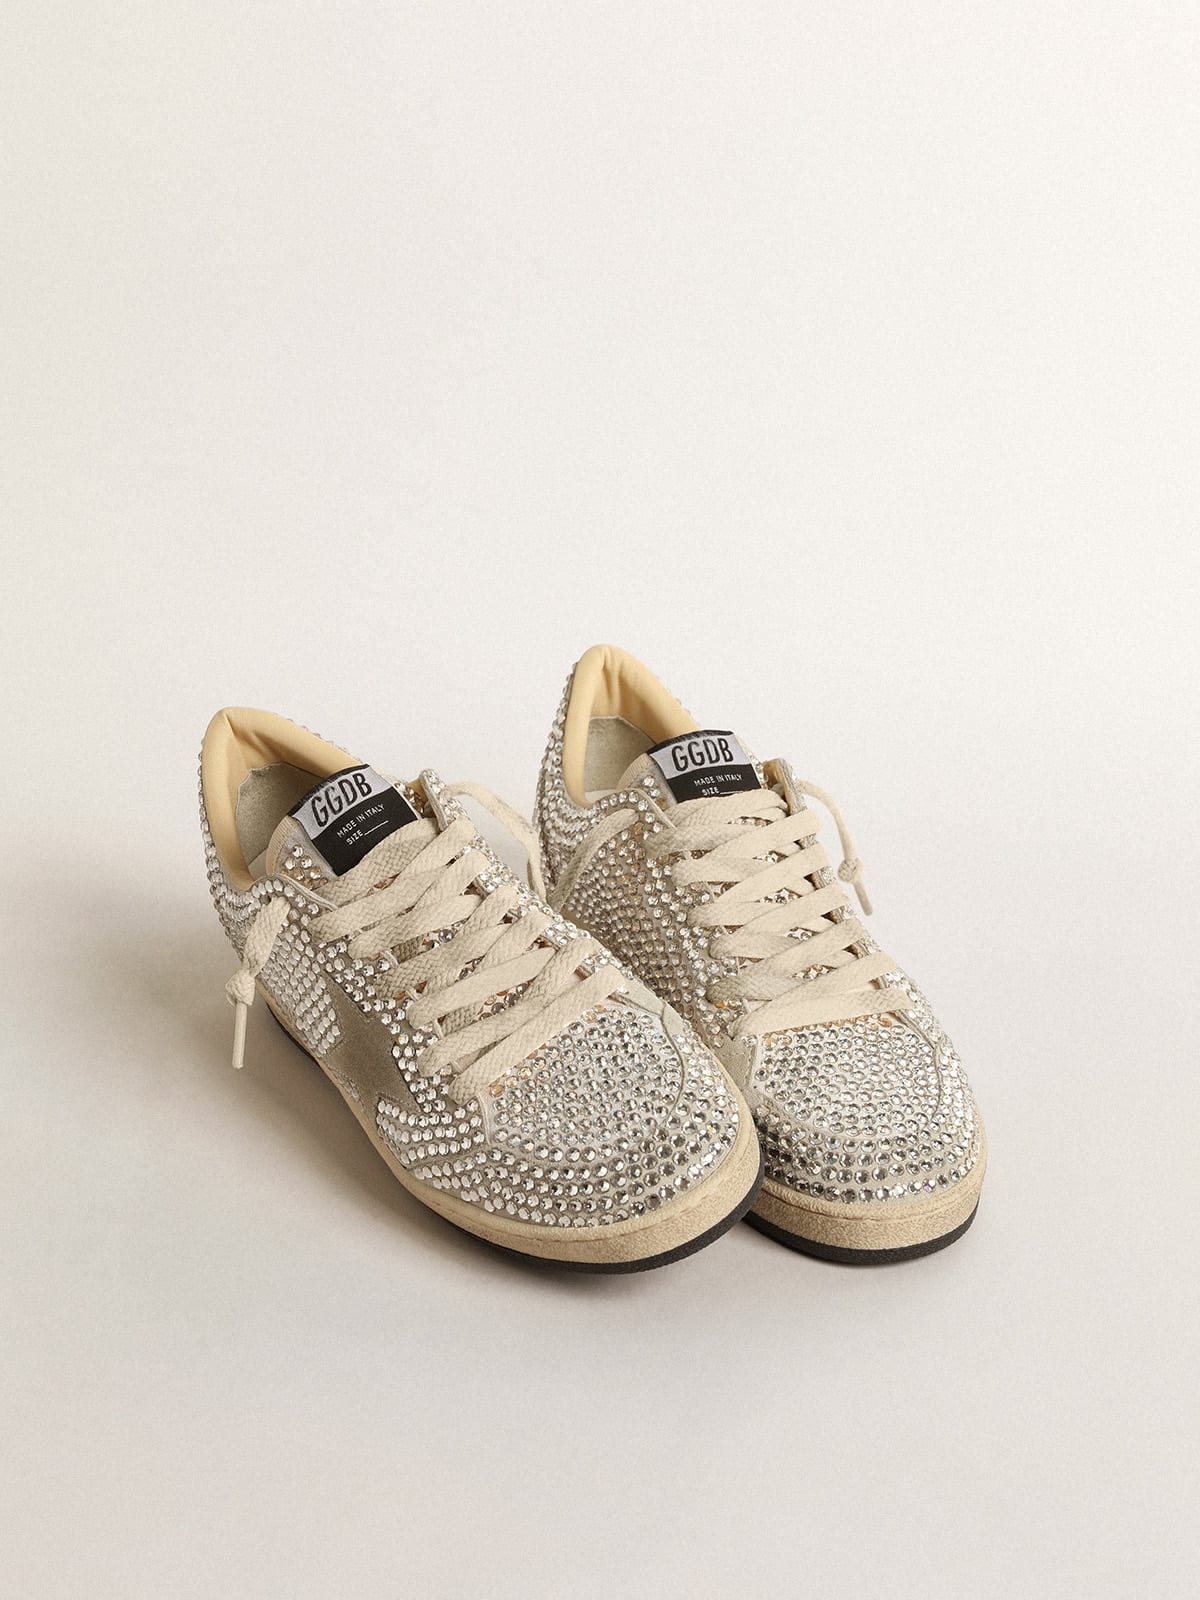 Golden Goose - Ball Star LTD with Swarovski crystals and gray suede star in 